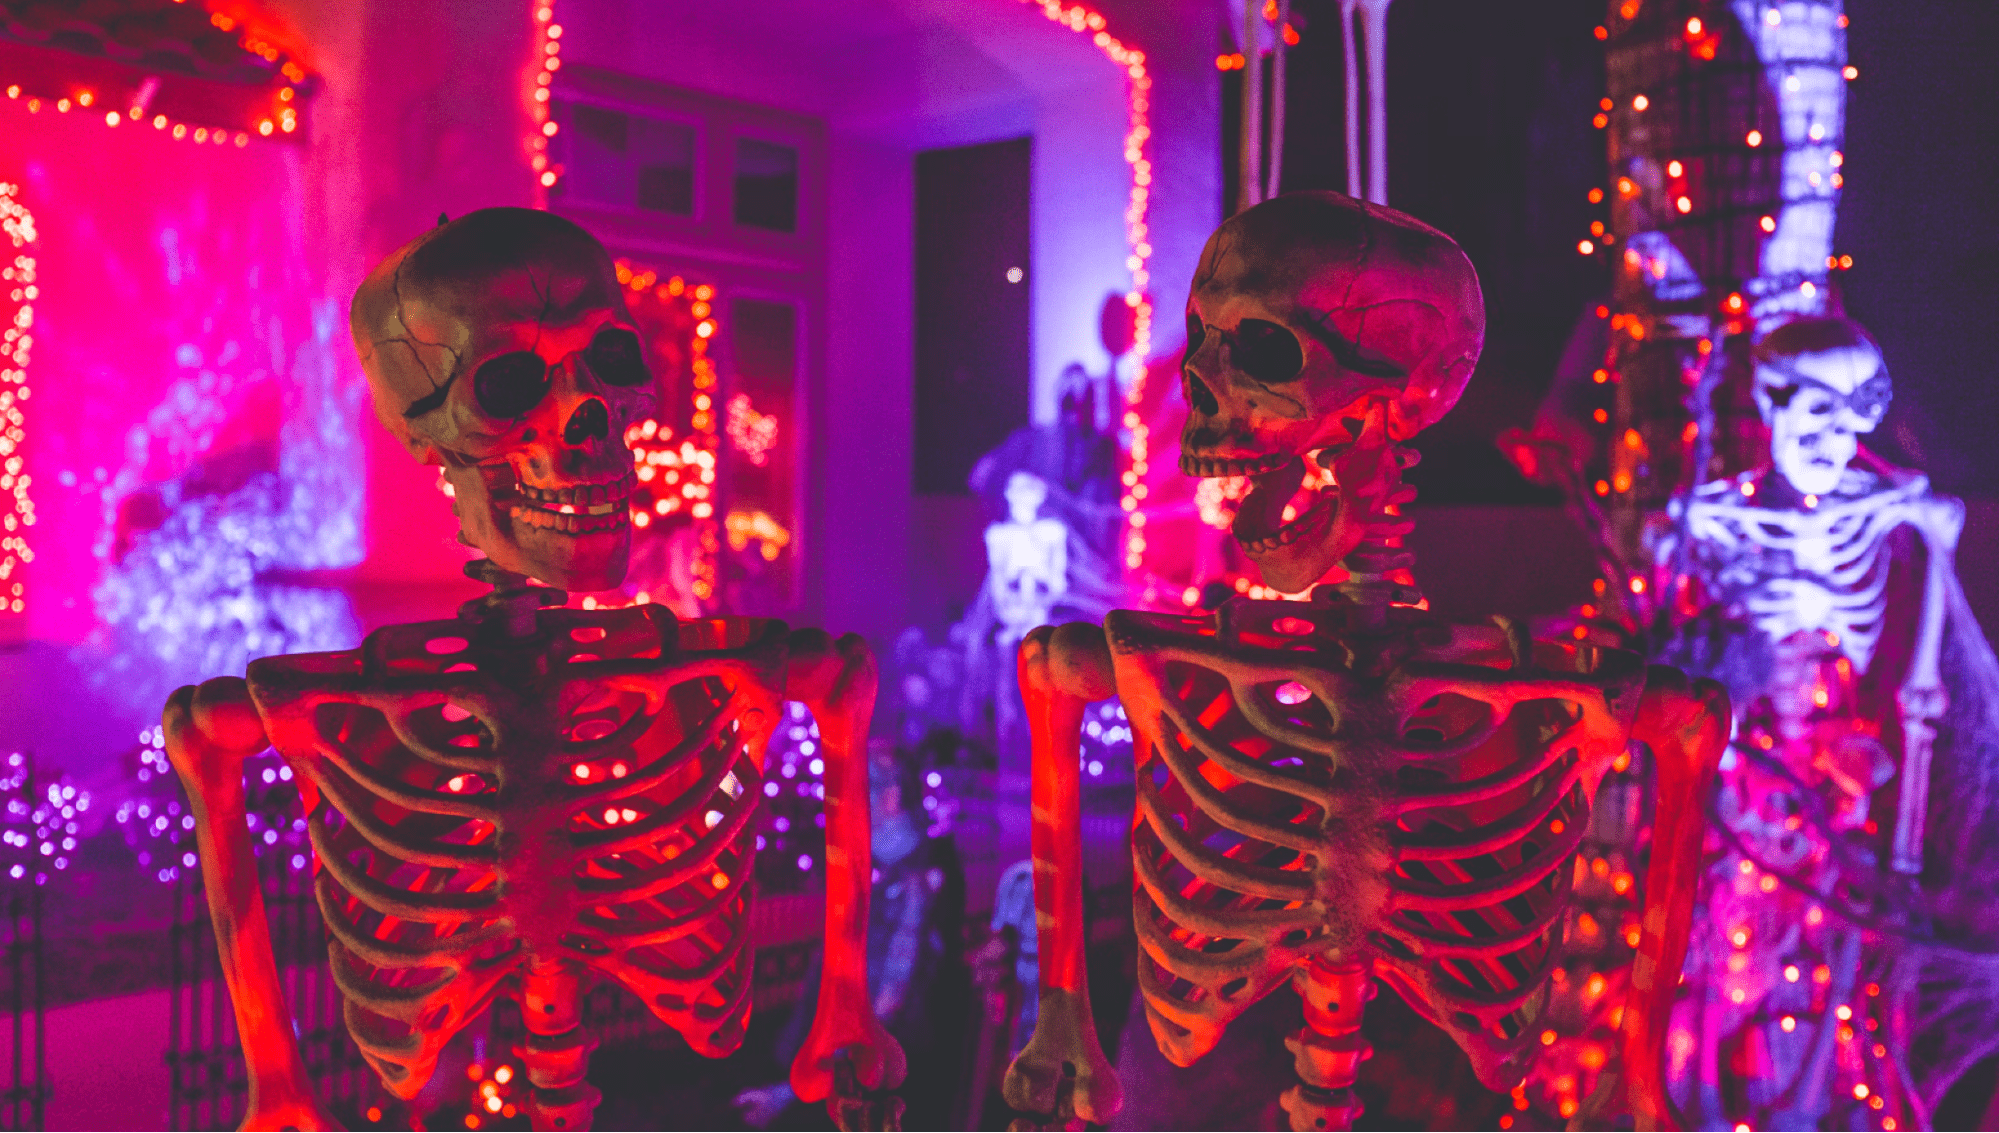 Close-up of skeleton decorations outside a property in the dark